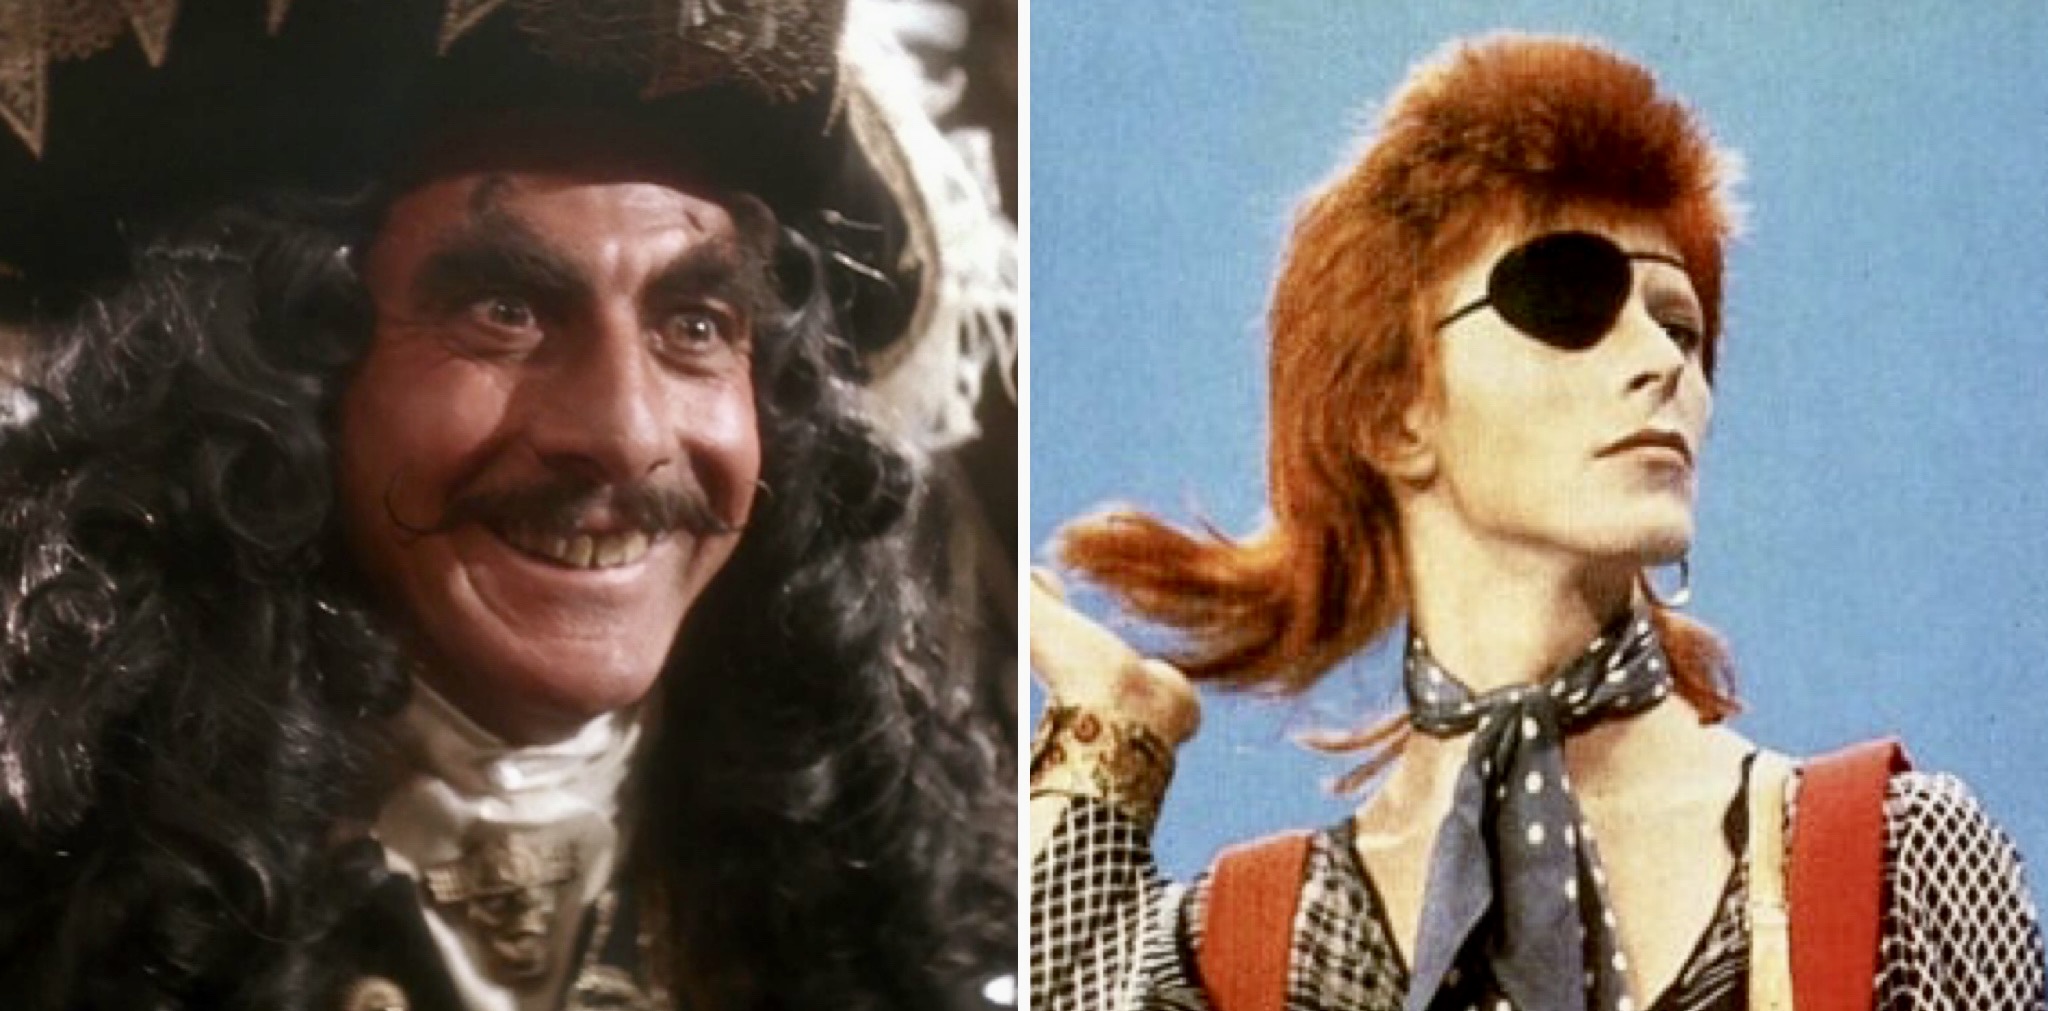 David Bowie was Steven Spielberg’s first choice to play Captain Hook